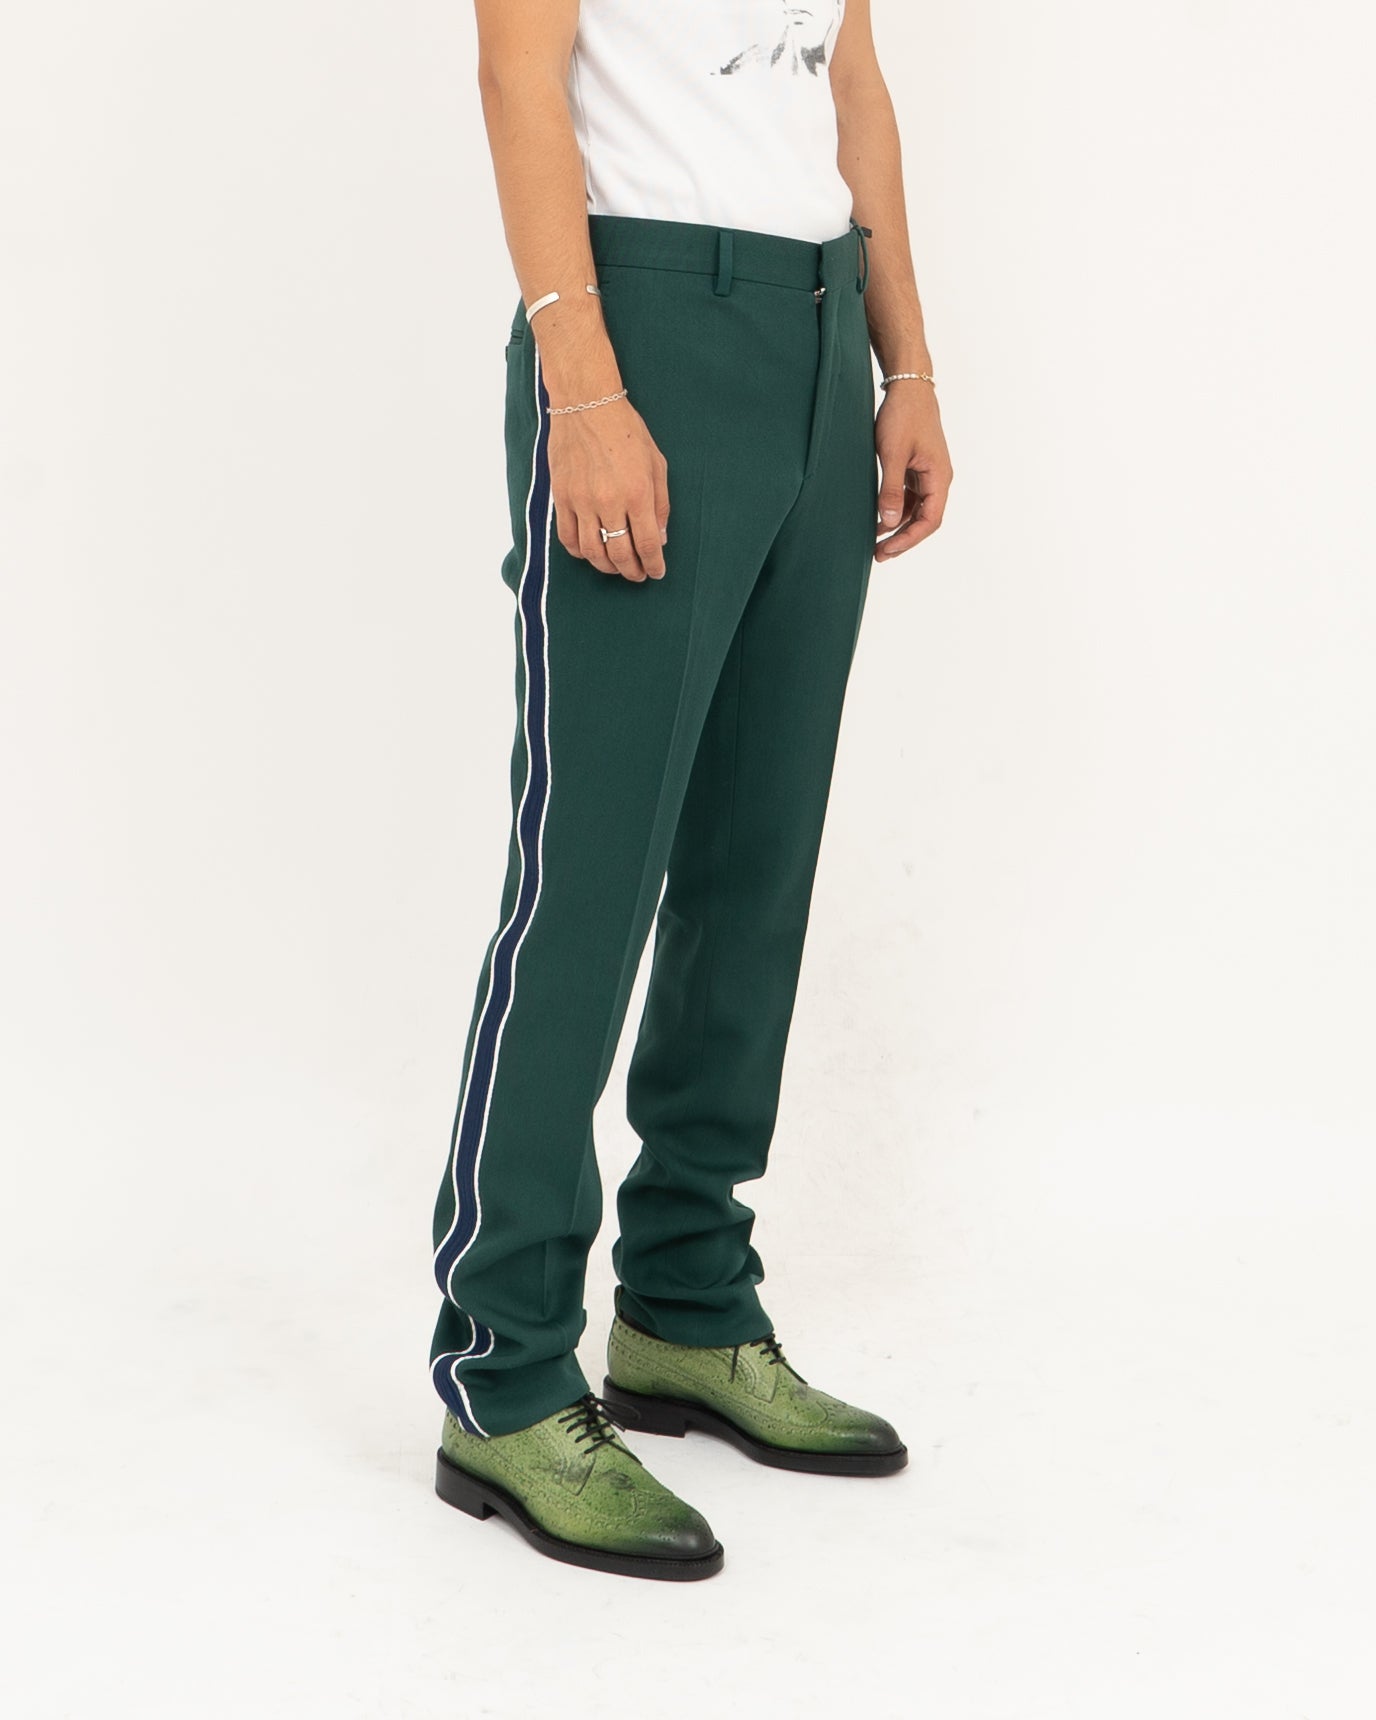 FW17 Green Marching Band Trousers